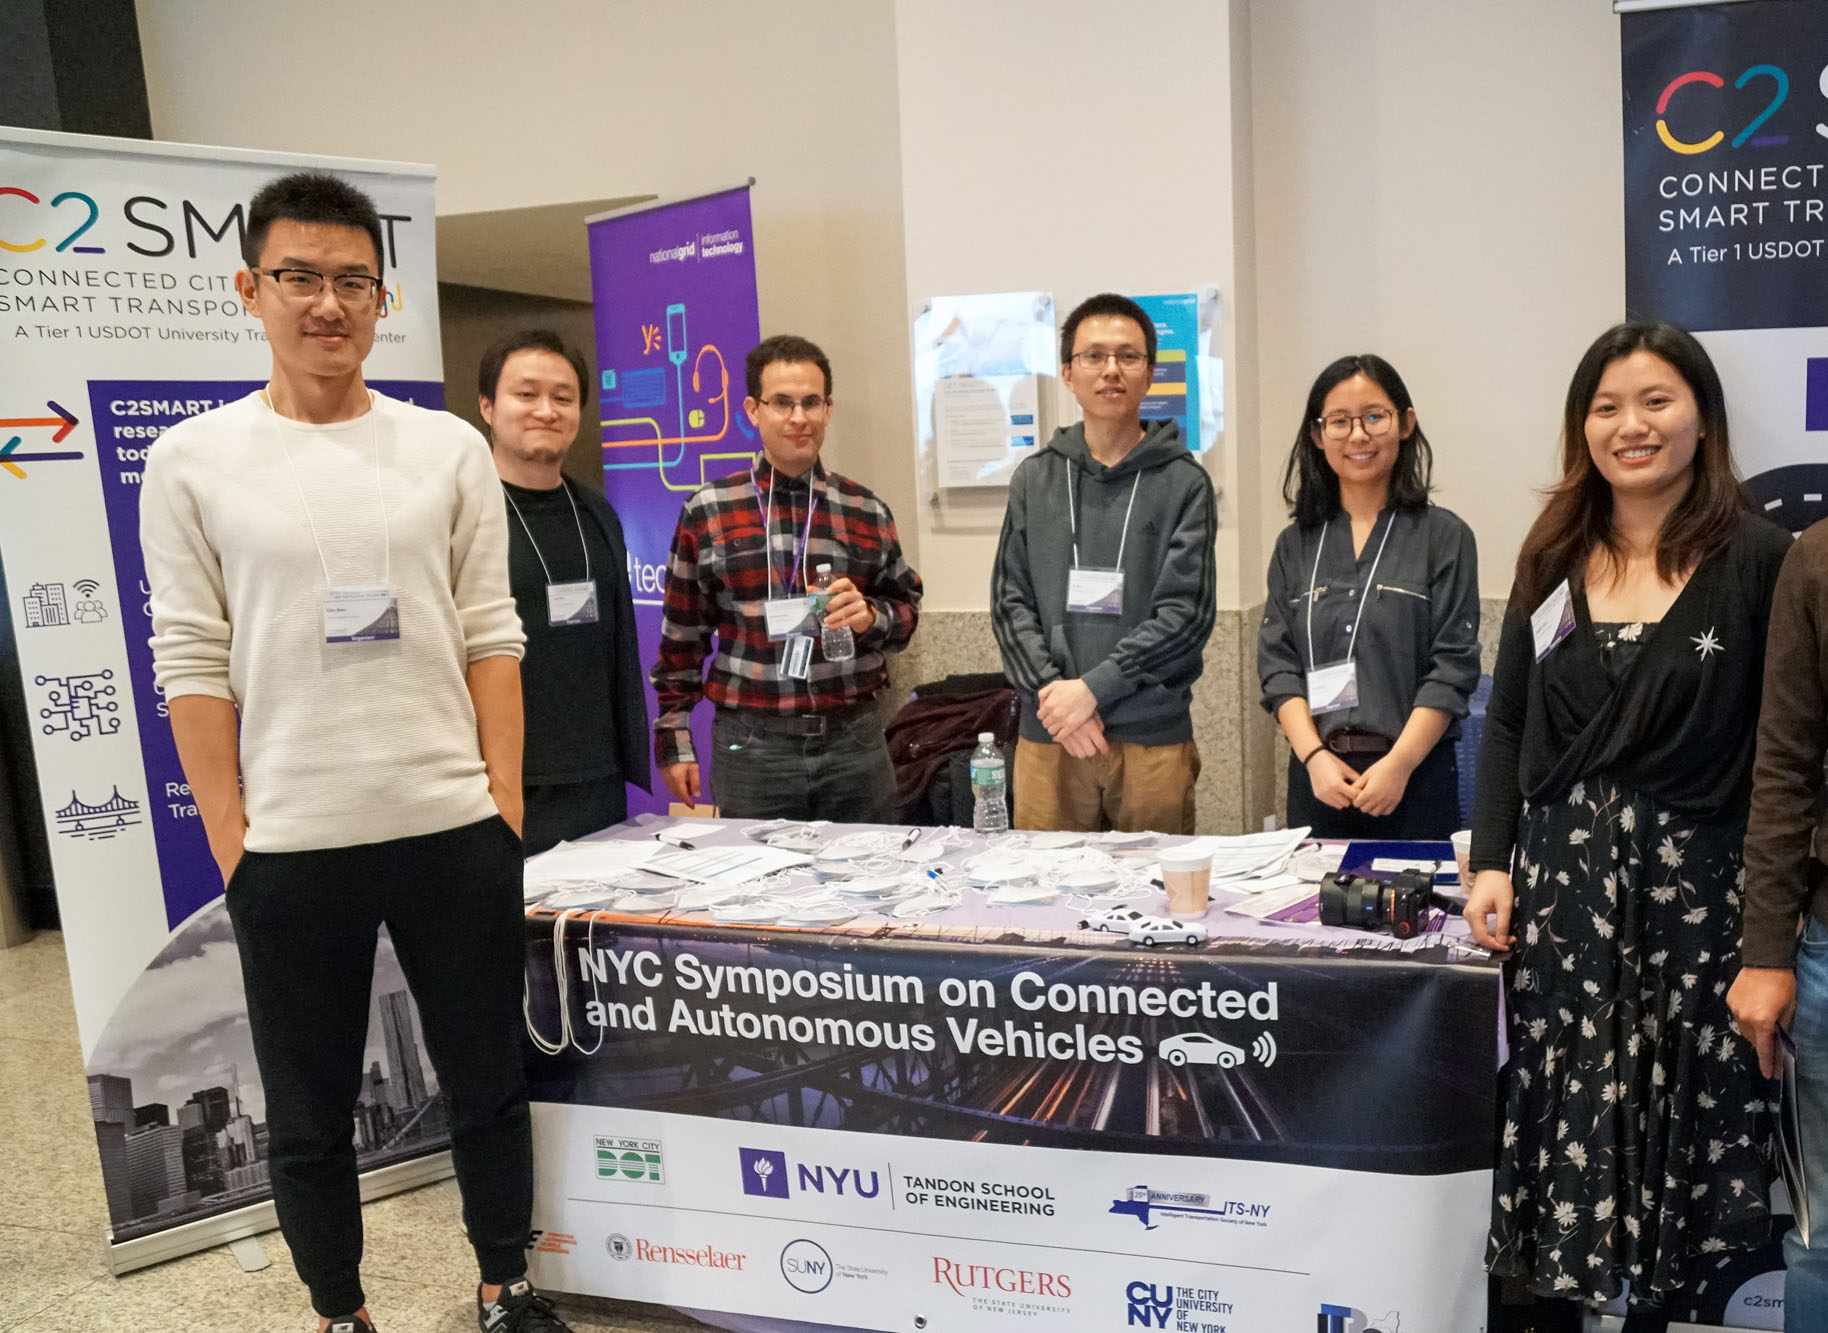 A host of student volunteers from C2SMART ensure the symposium ran smoothly, including (L to R) PhD students Zilin Bian, Fan Zuo, Reuben Juster, Di Sha, Ding Wang, Jingqin Gao.